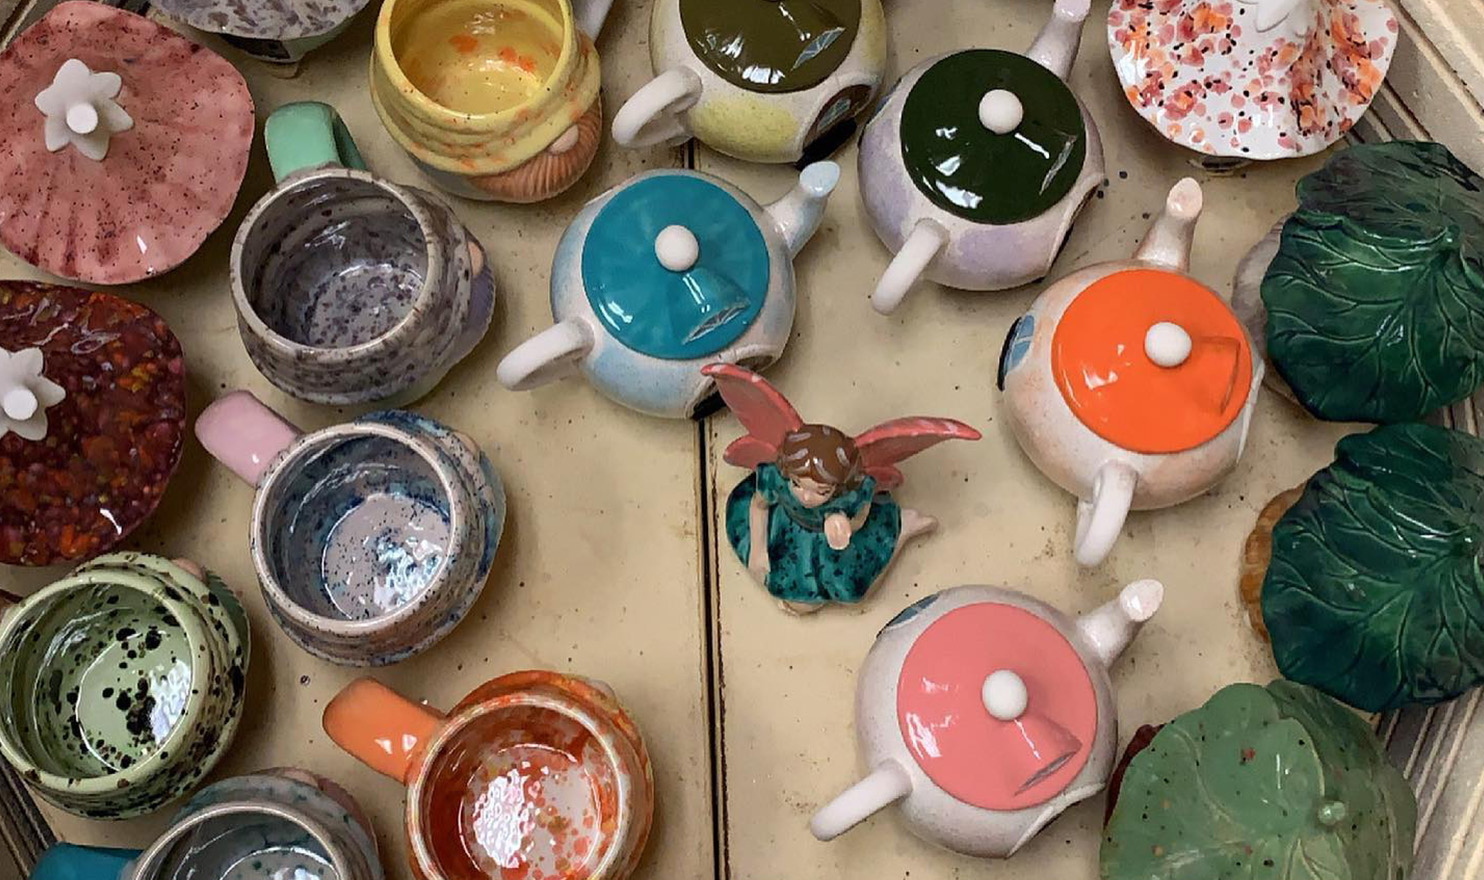 A variety of colorful, hand painted pottery items sit in the kiln after being glazed and fired.